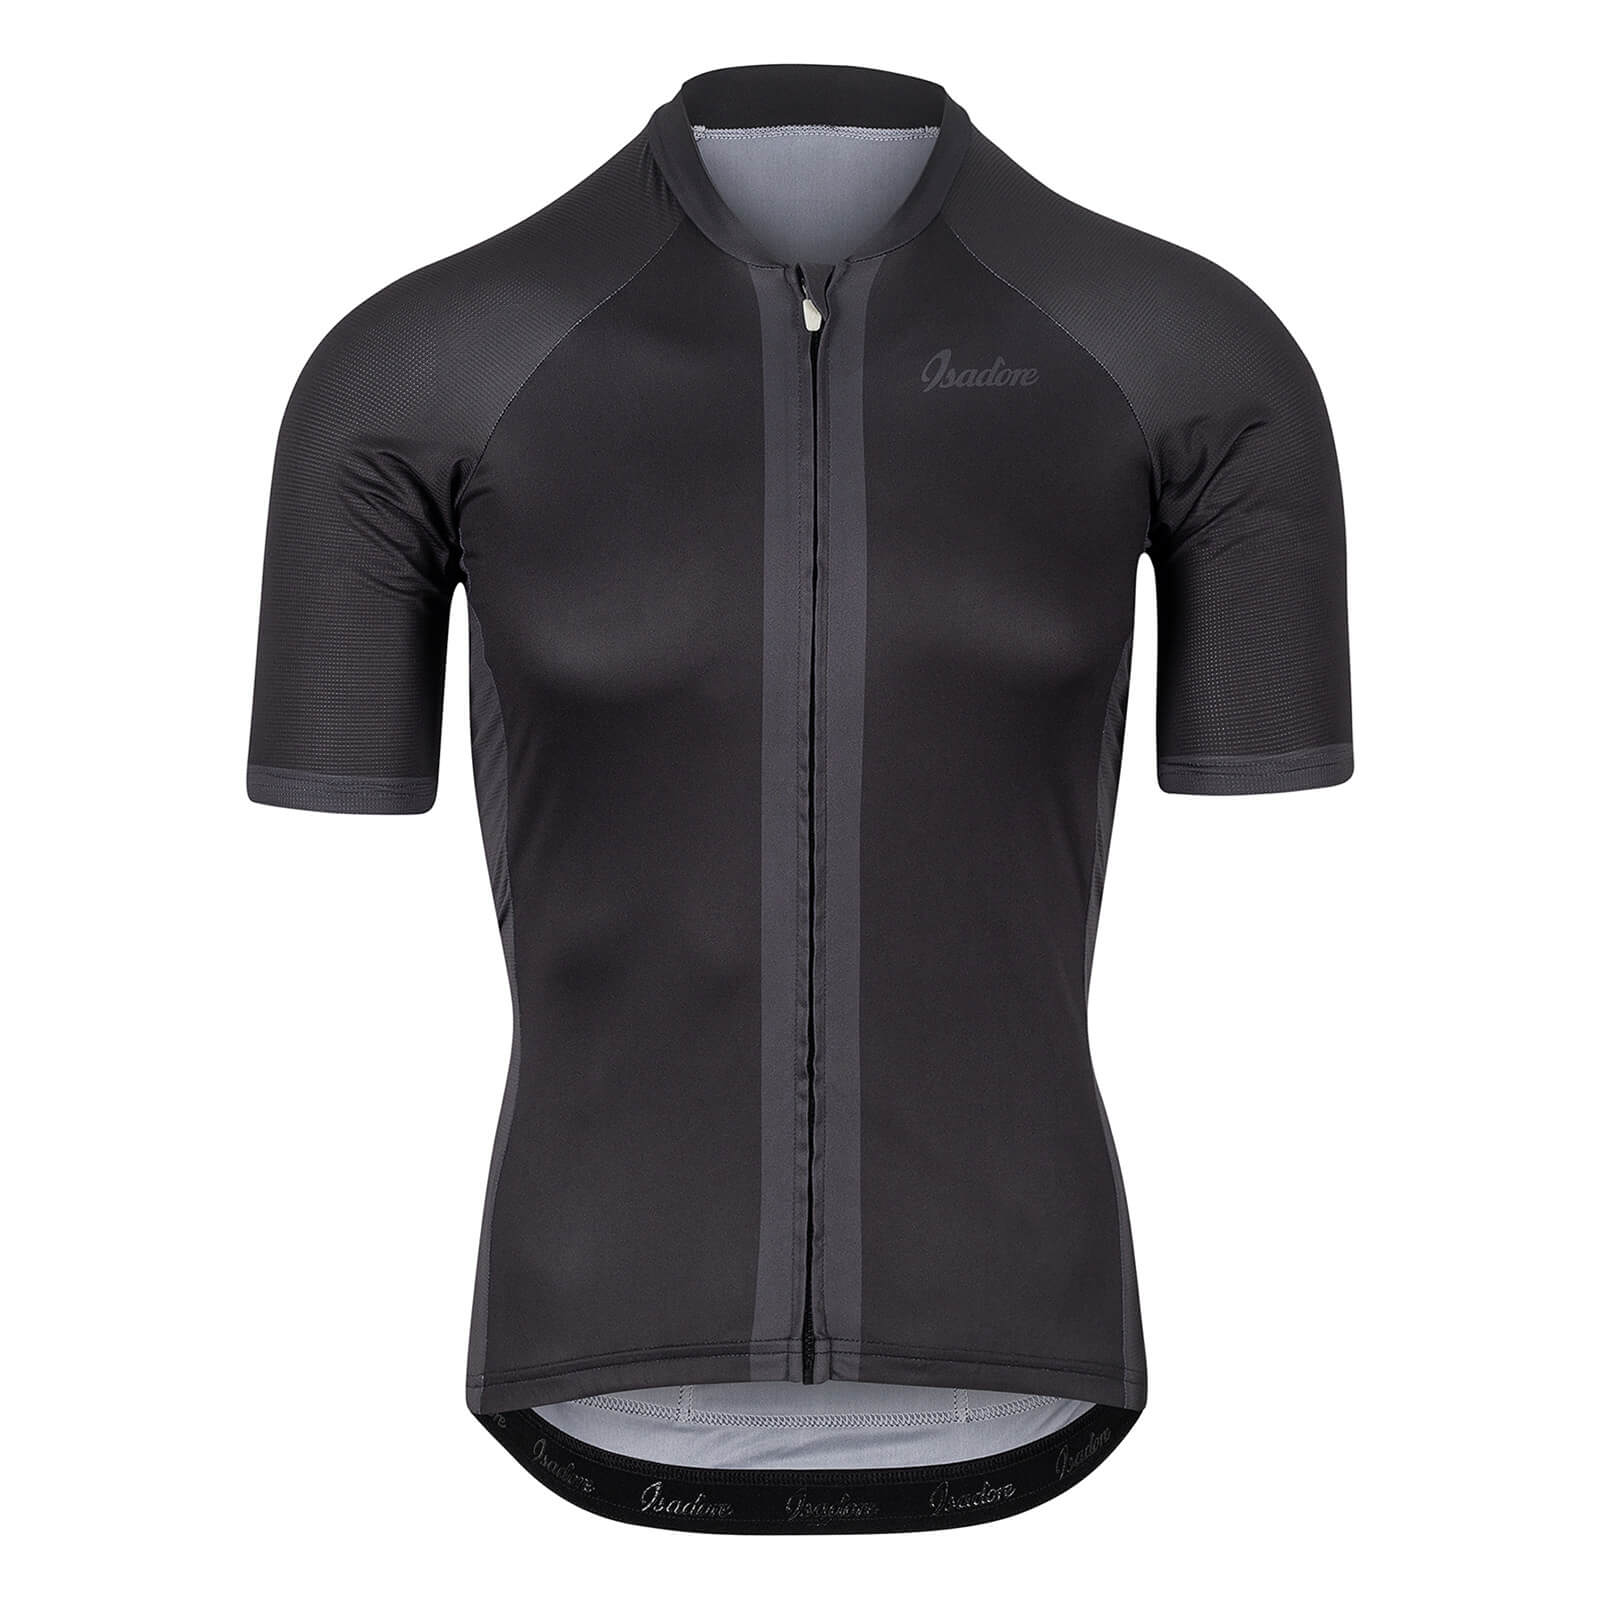 Isadore Debut Short Sleeve Jersey - X-Large - Anthracite